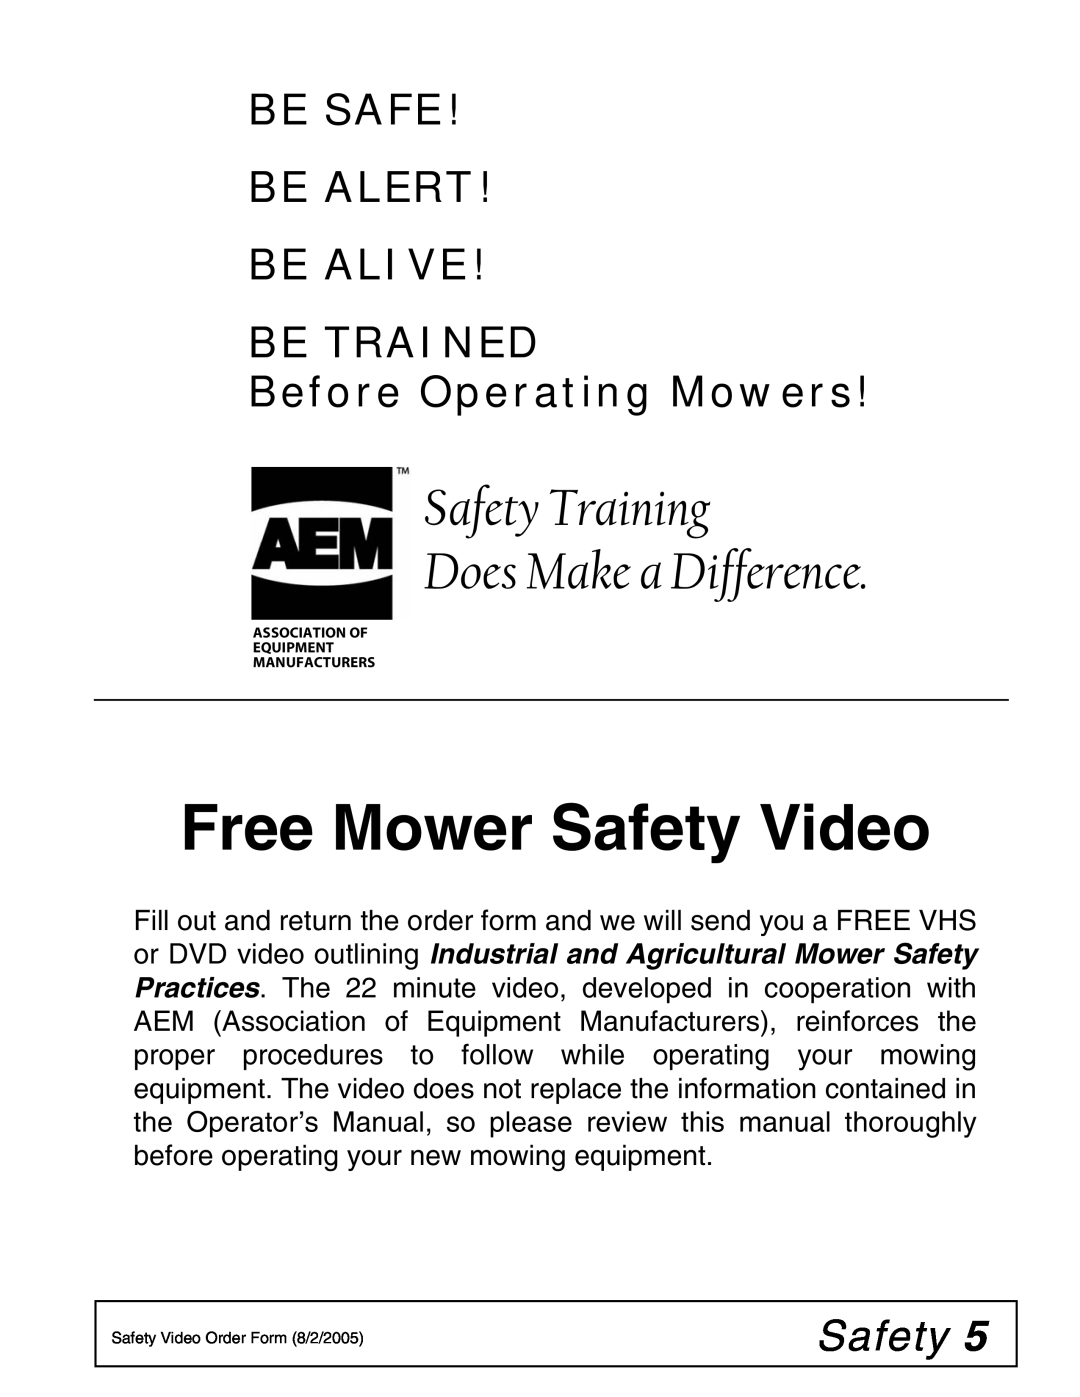 Woods Equipment BW126-3, BW180Q-3, BW126Q-3, BW180-3 Free Mower Safety Video, Safety Training Does Make a Difference 